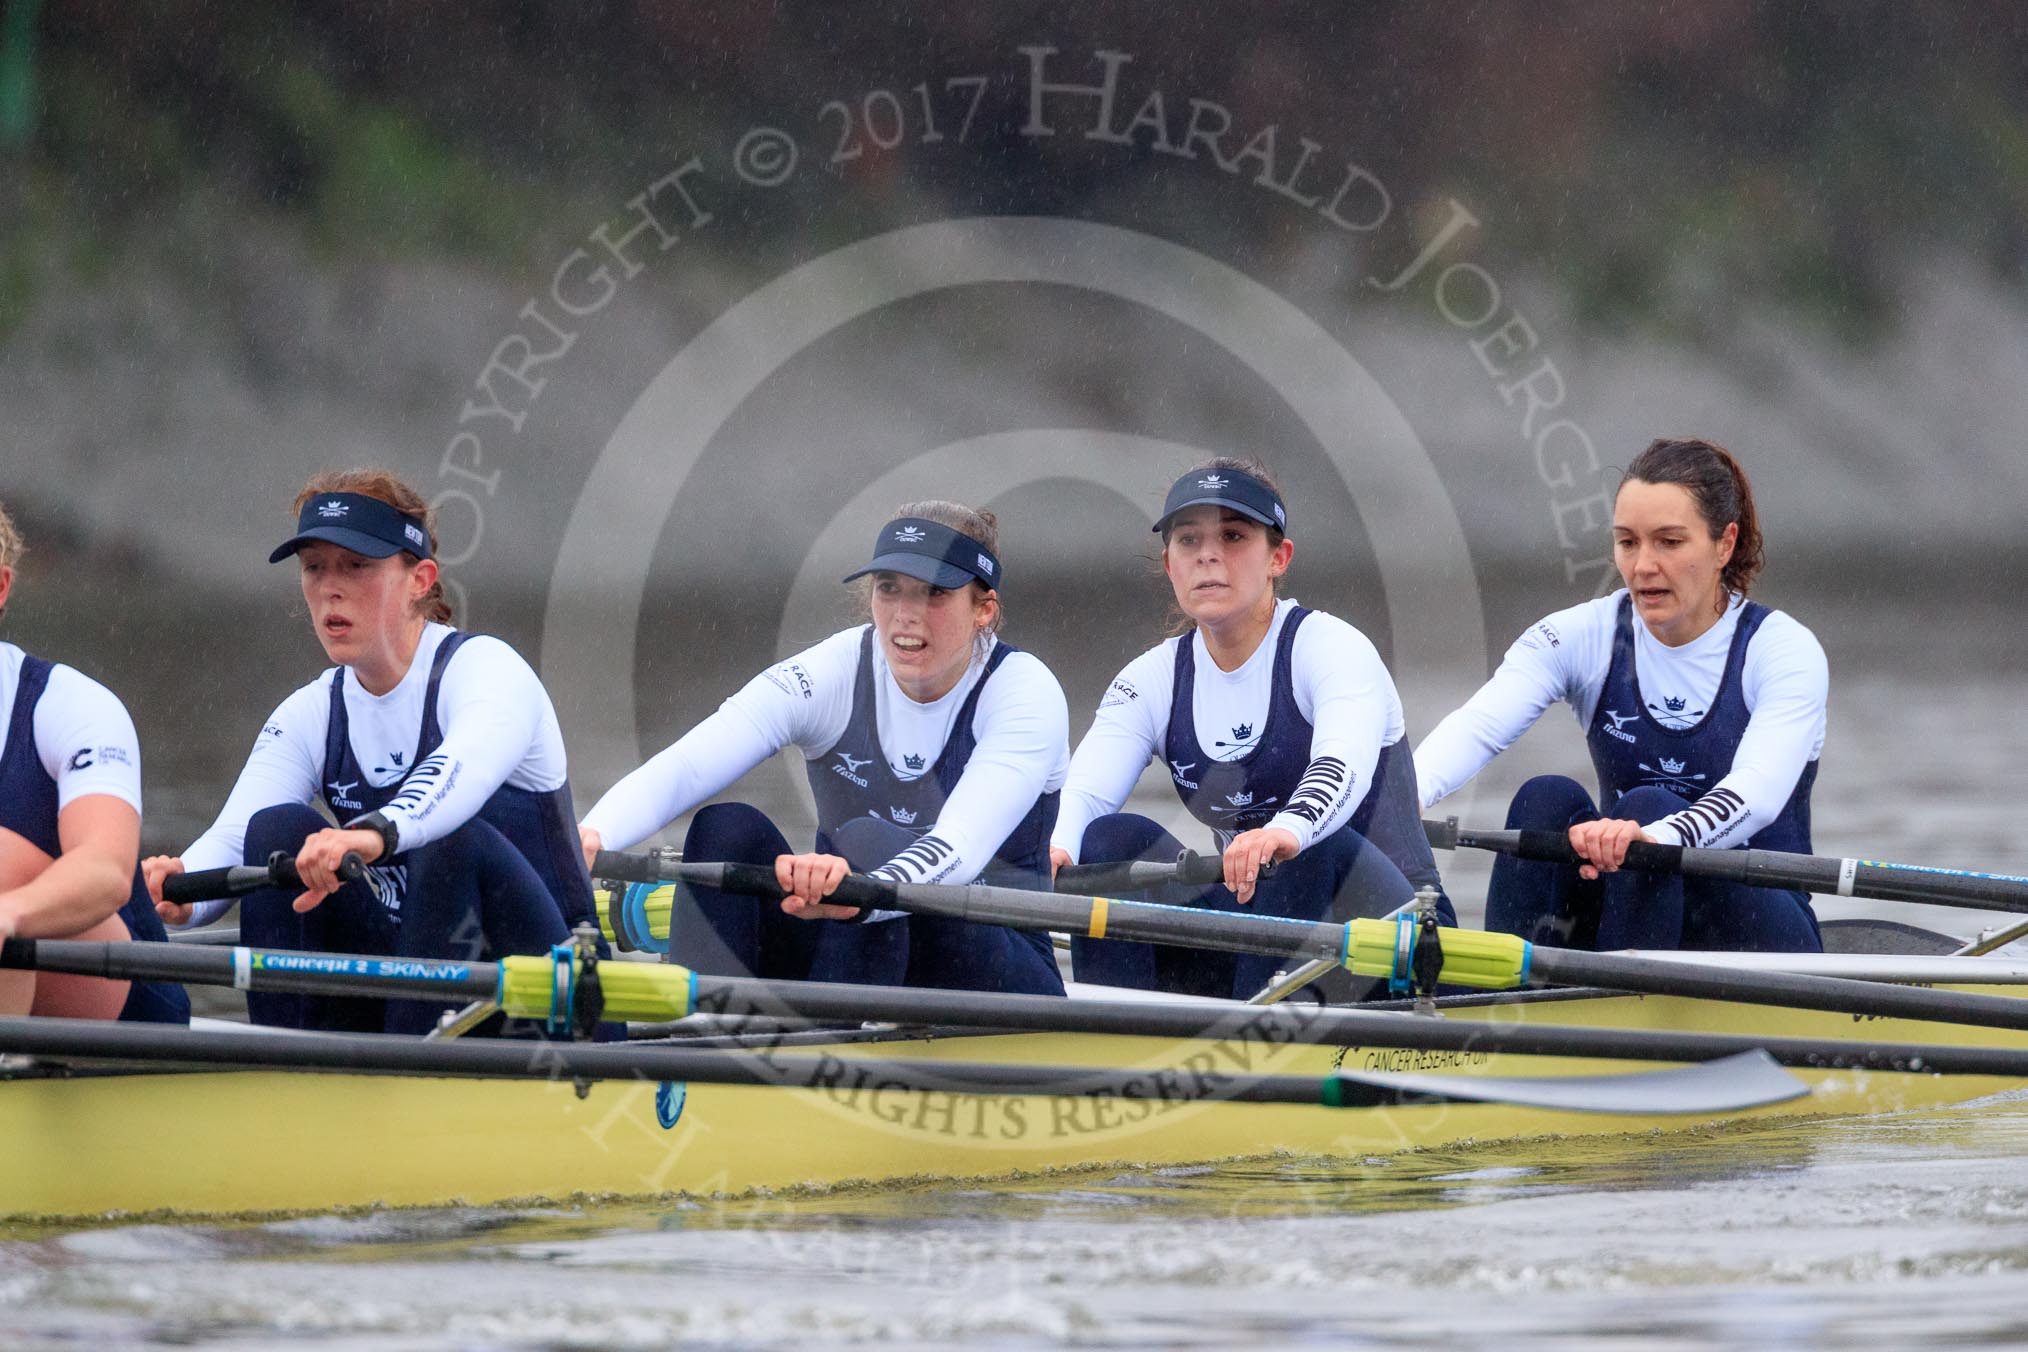 The Boat Race season 2018 - Women's Boat Race Trial Eights (OUWBC, Oxford): "Coursing River" - 4 Anna Murgatroyd, 3 Stefanie Zekoll, 2 Rachel Anderson, bow Sarah Payne-Riches.
River Thames between Putney Bridge and Mortlake,
London SW15,

United Kingdom,
on 21 January 2018 at 14:37, image #121